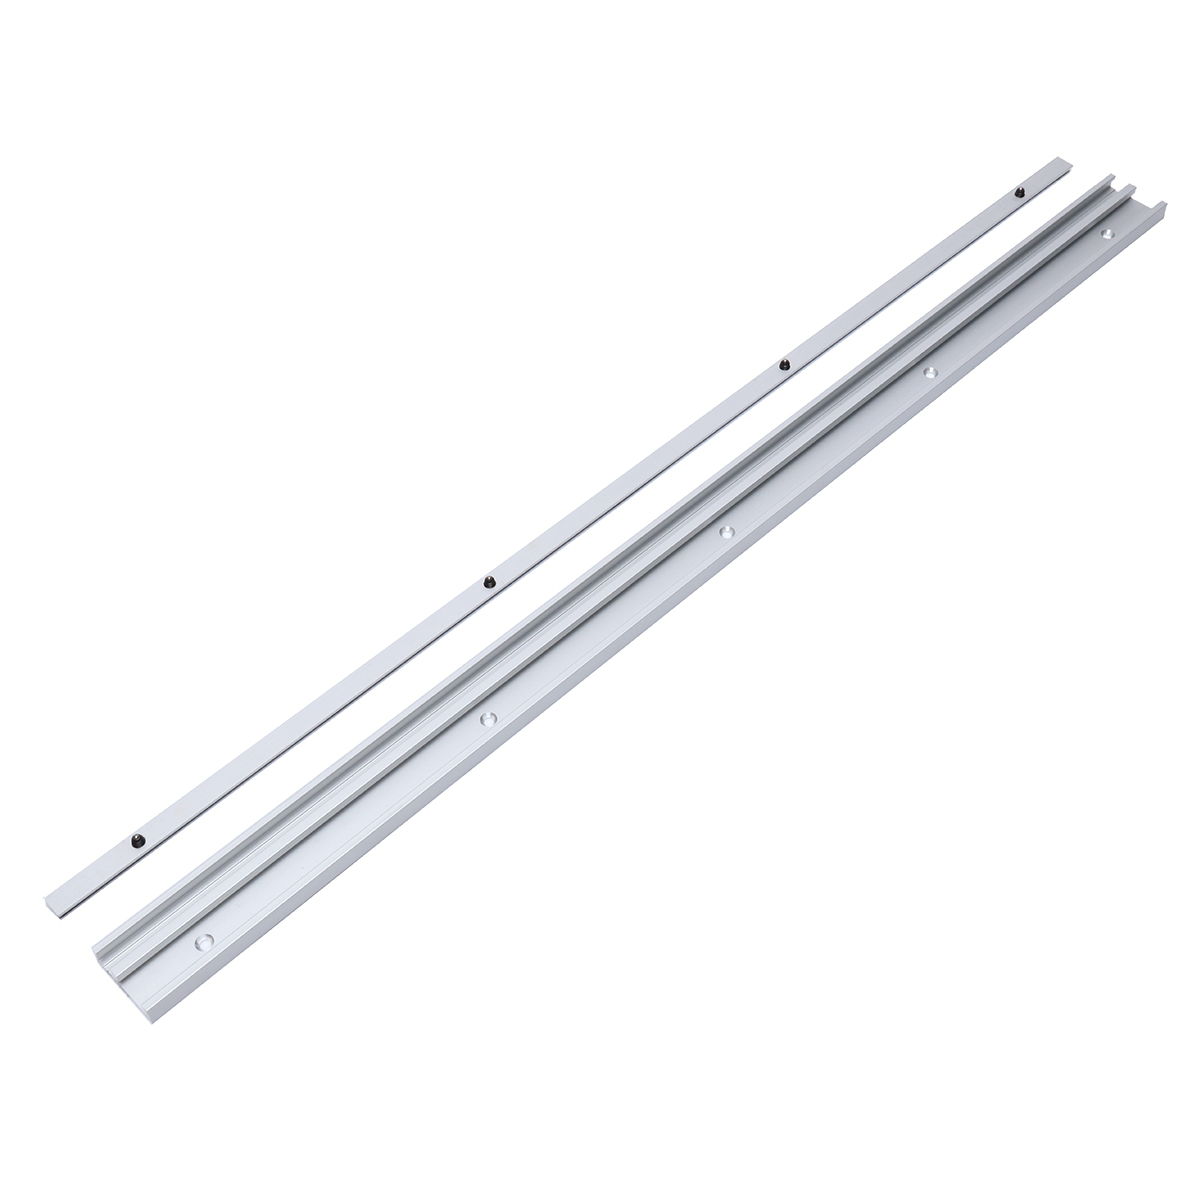 400-1220mm-Aluminum-Alloy-T-Track-T-slot-Miter-Track-with-Slide-Metric-Ruler-Scale-for-Table-Saw-Rou-1462377-6